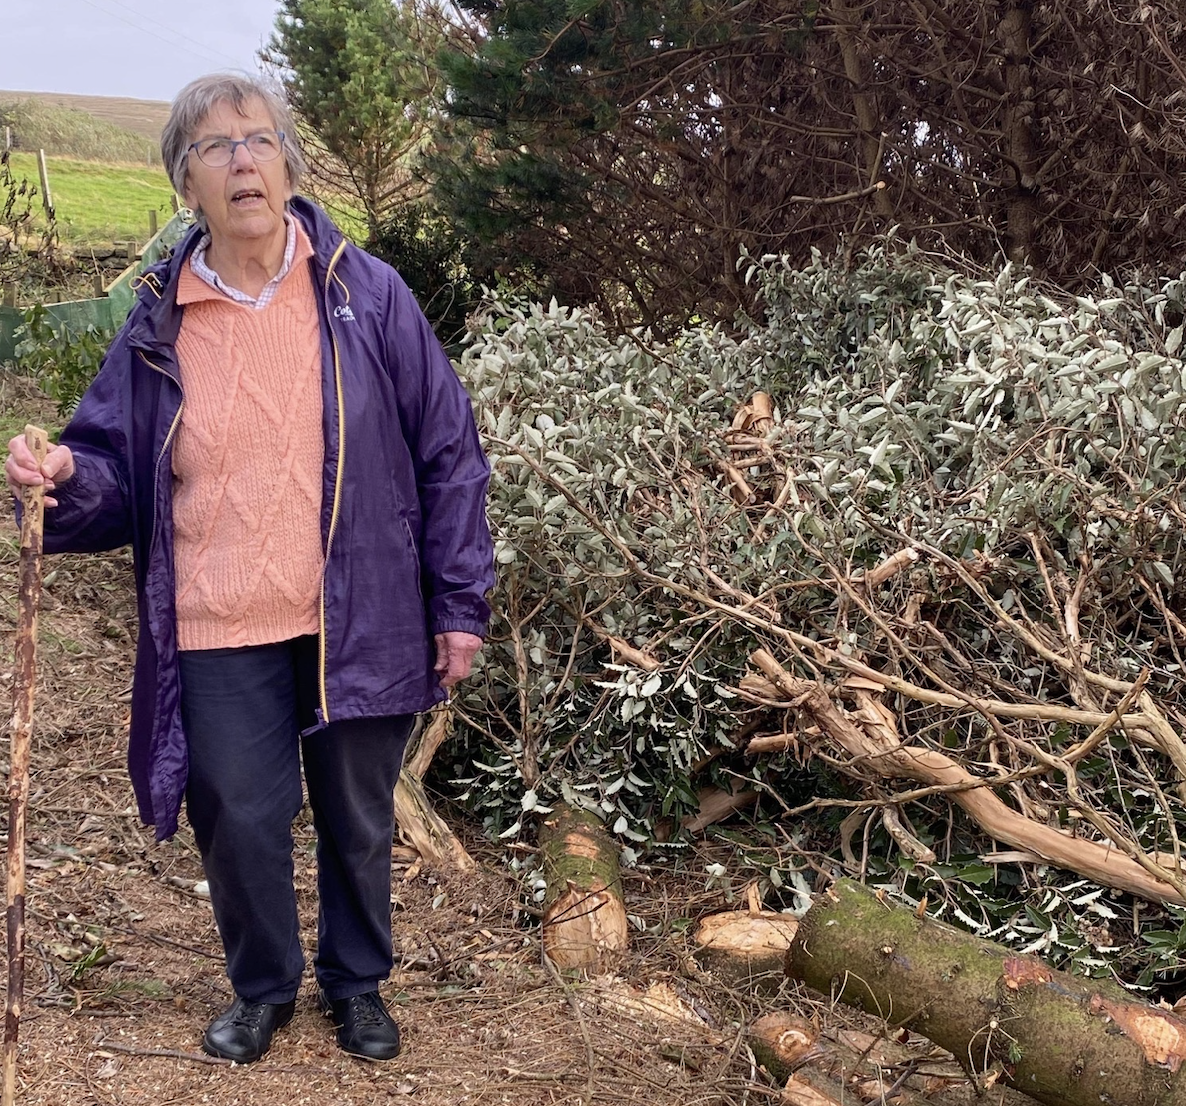 Elderly Yell resident 'distraught' after trees cut by power company